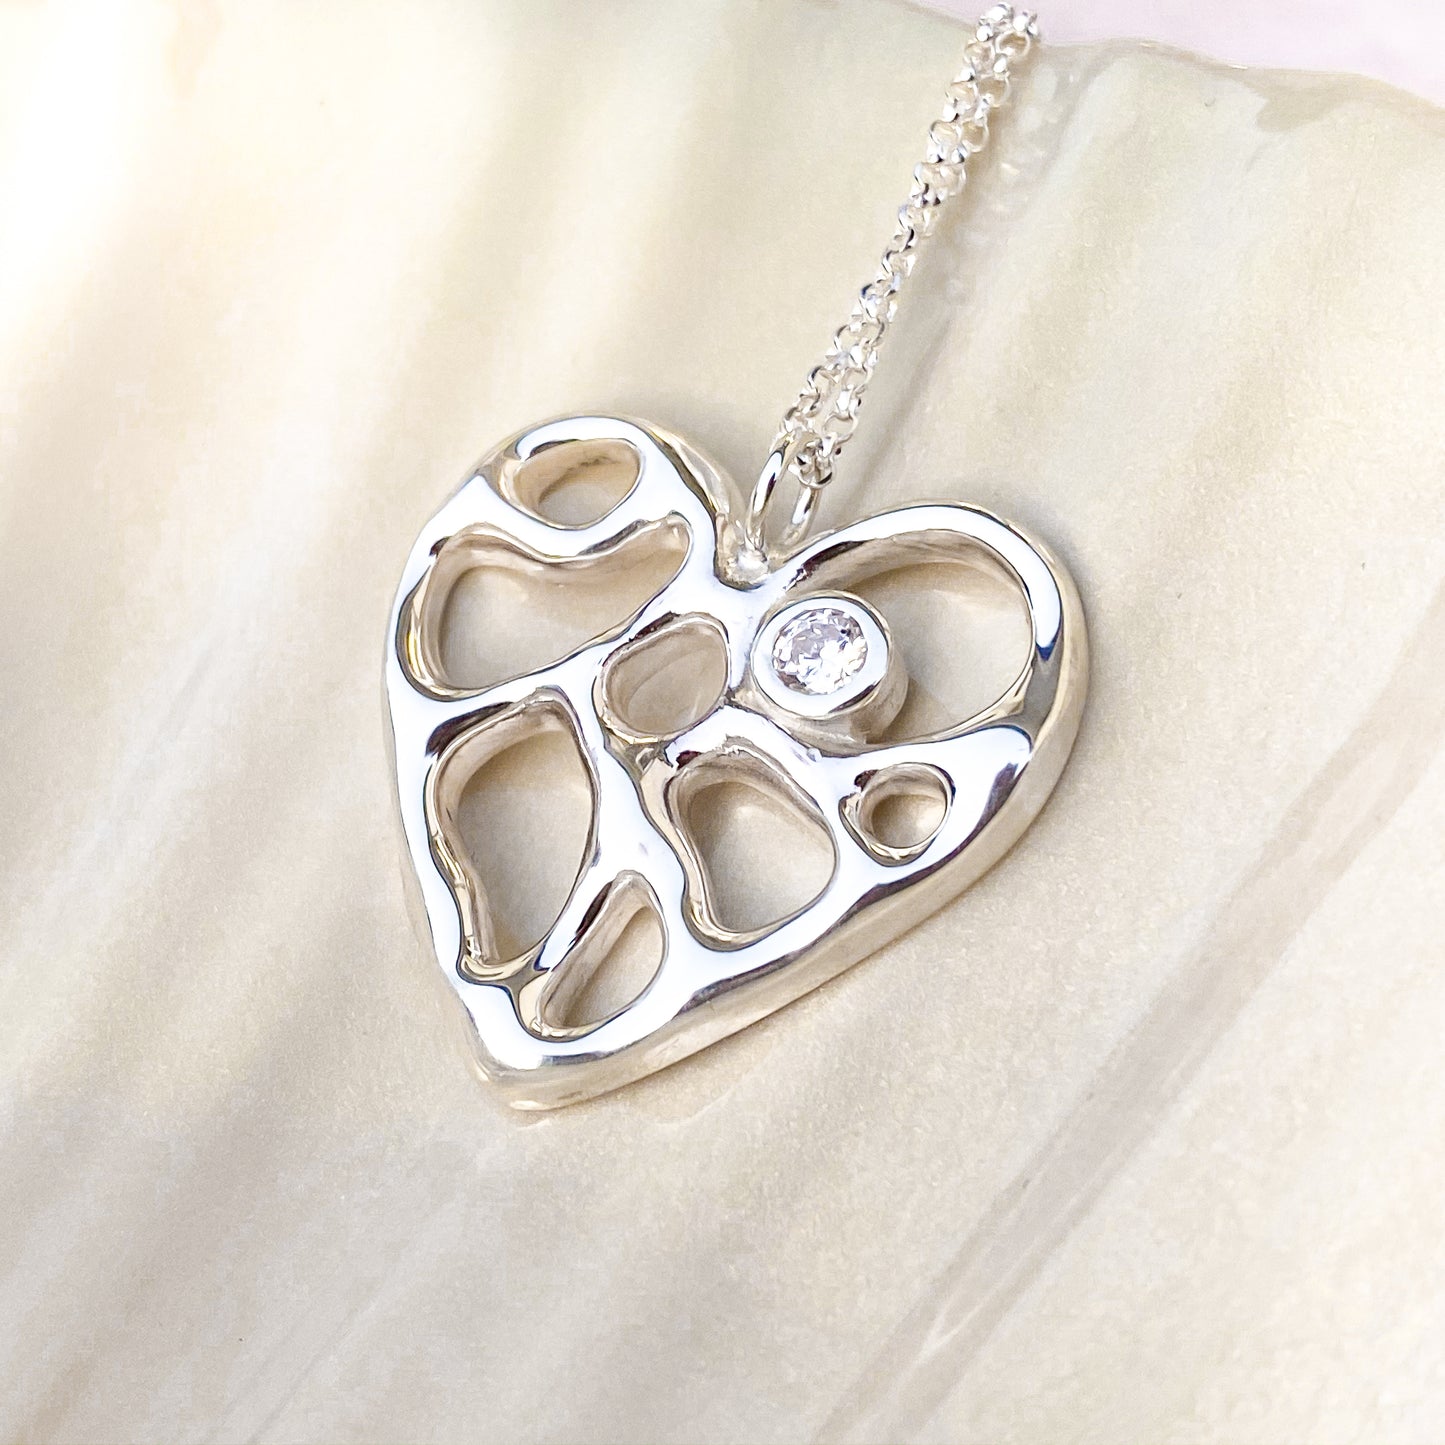 Silver Infinity Heart Necklace with White Topaz